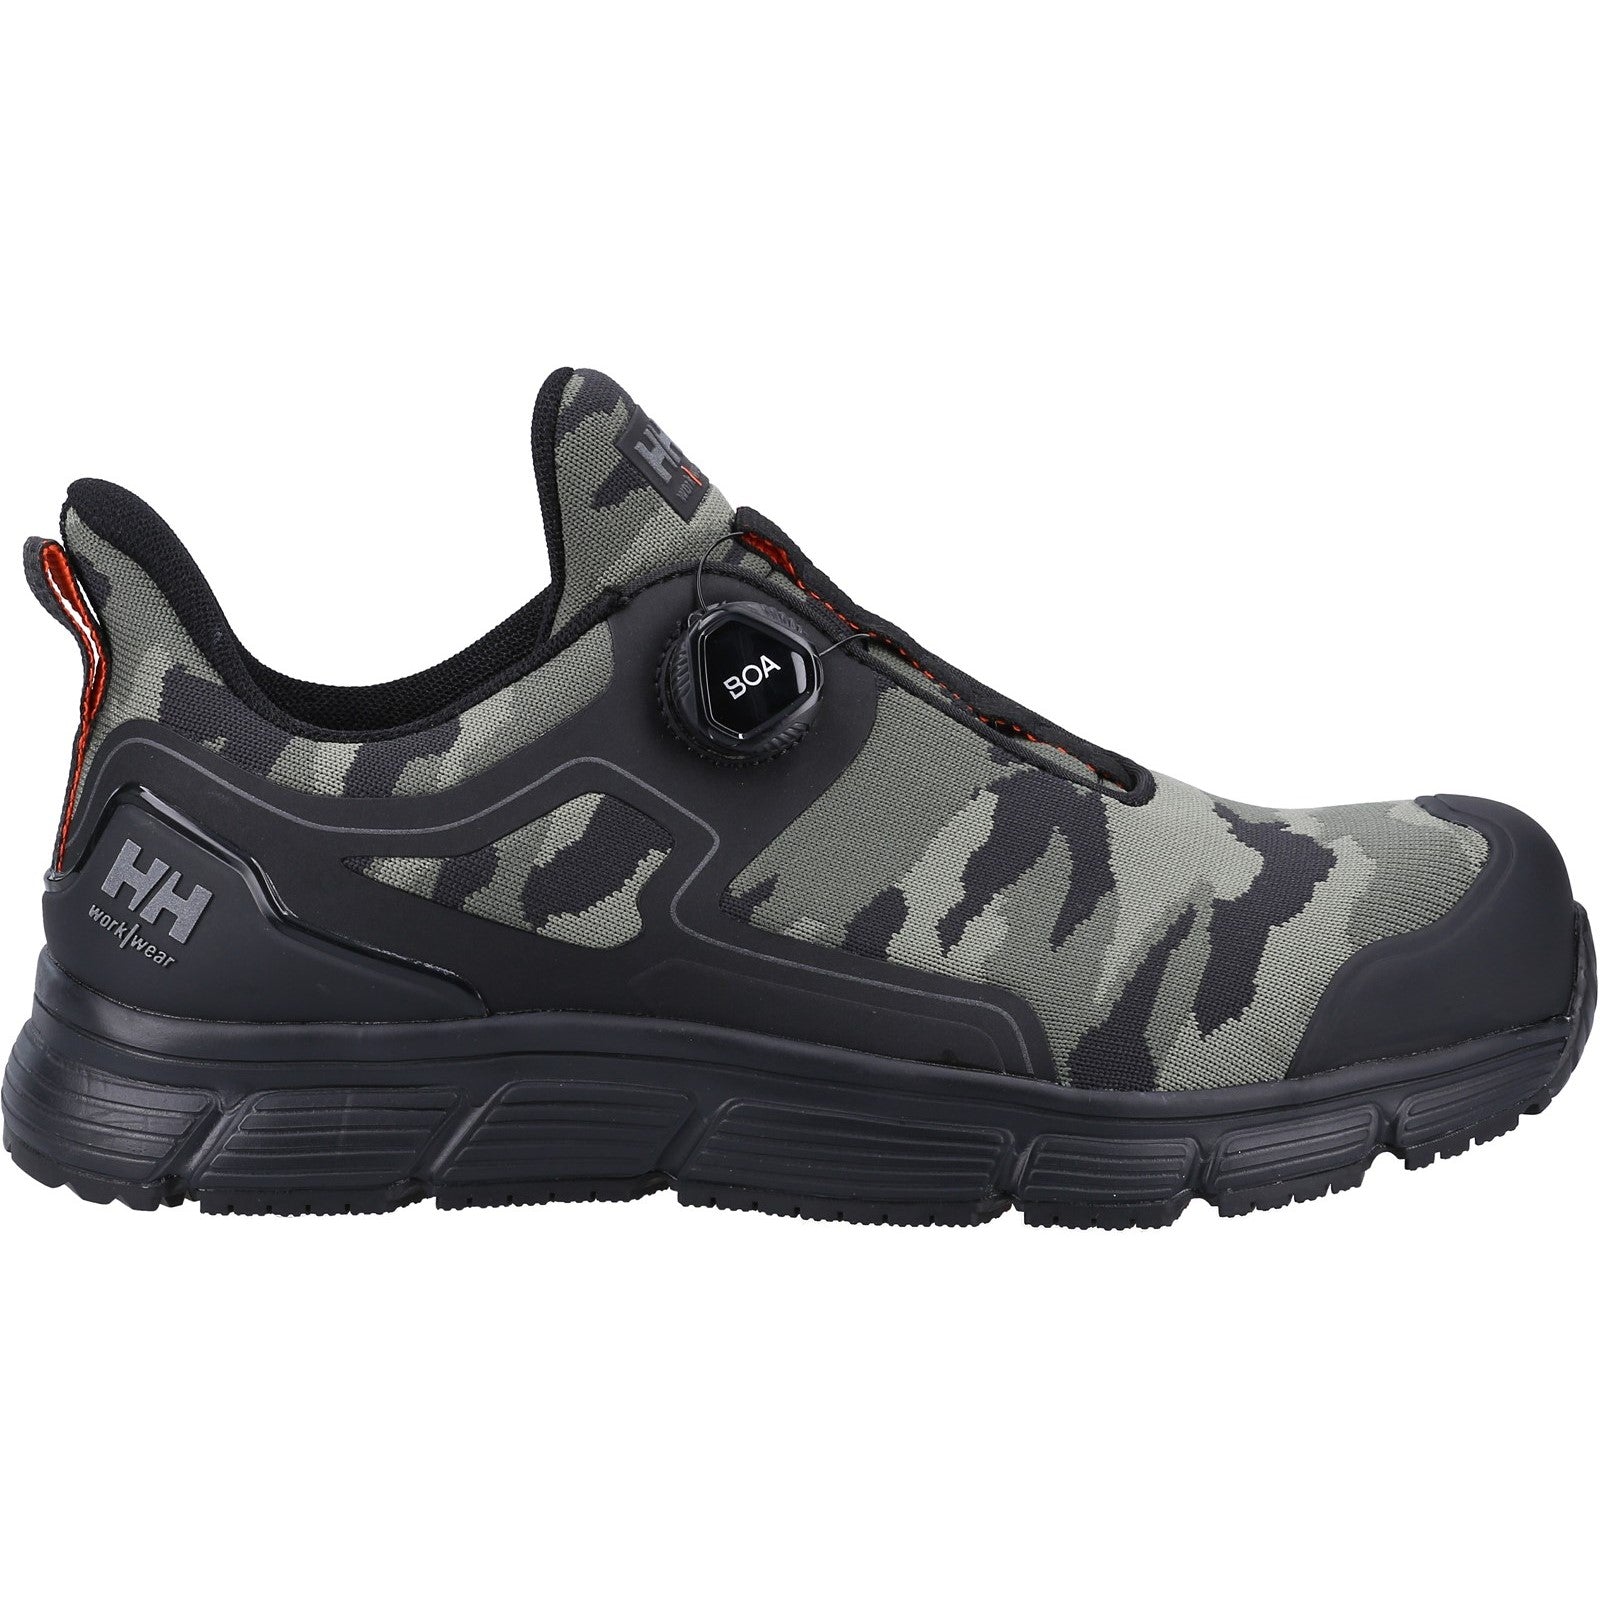 Helly Hansen Kensing Low Boa S3 Safety Trainer in Camo